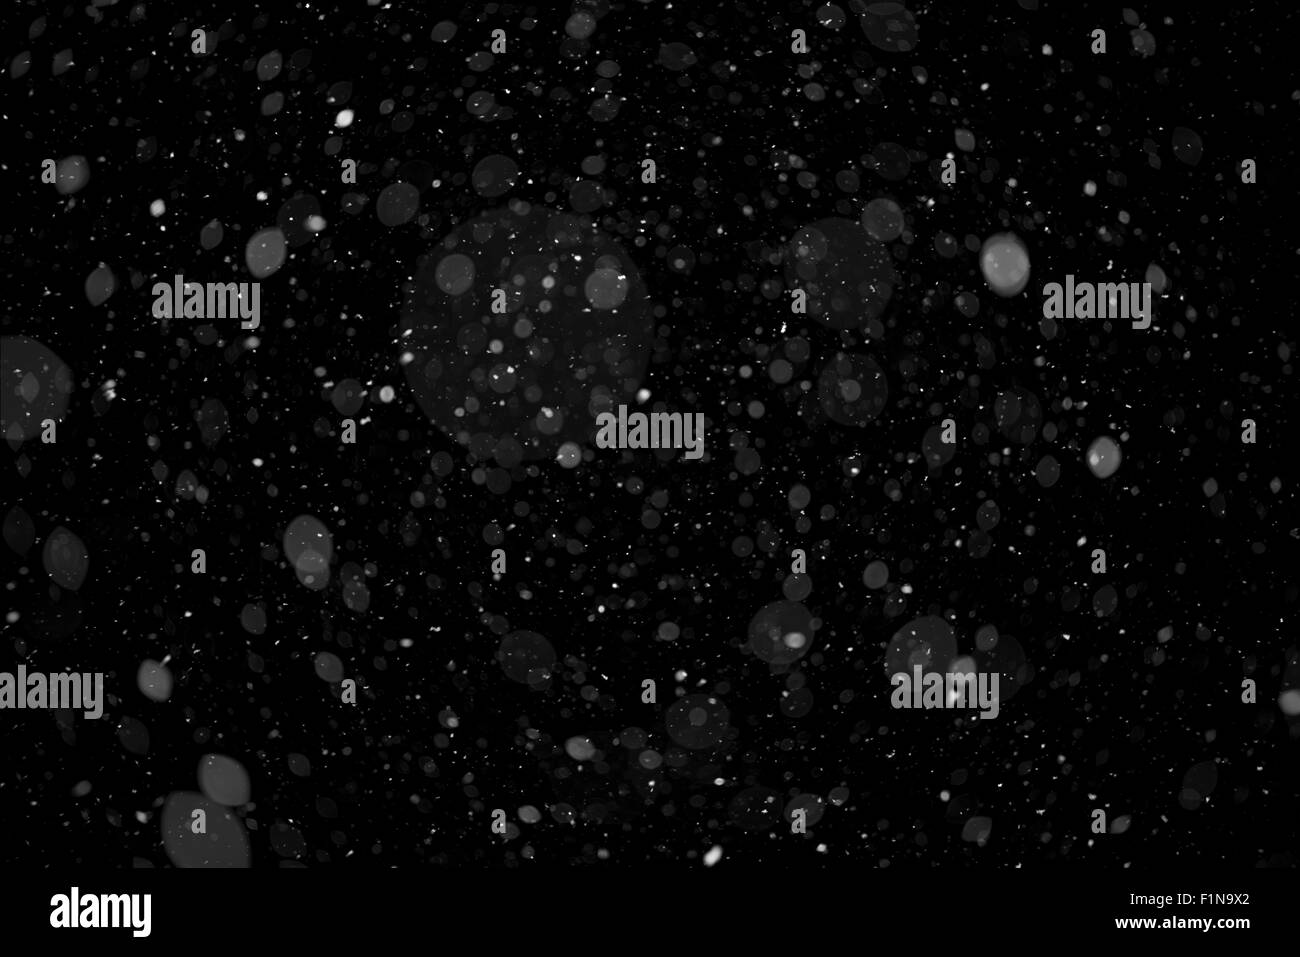 High Resolution Real Heavy Falling Snow Isolated on Solid Black Background. Falling Snow Alpha Channel Version 1 - Heavy. Stock Photo